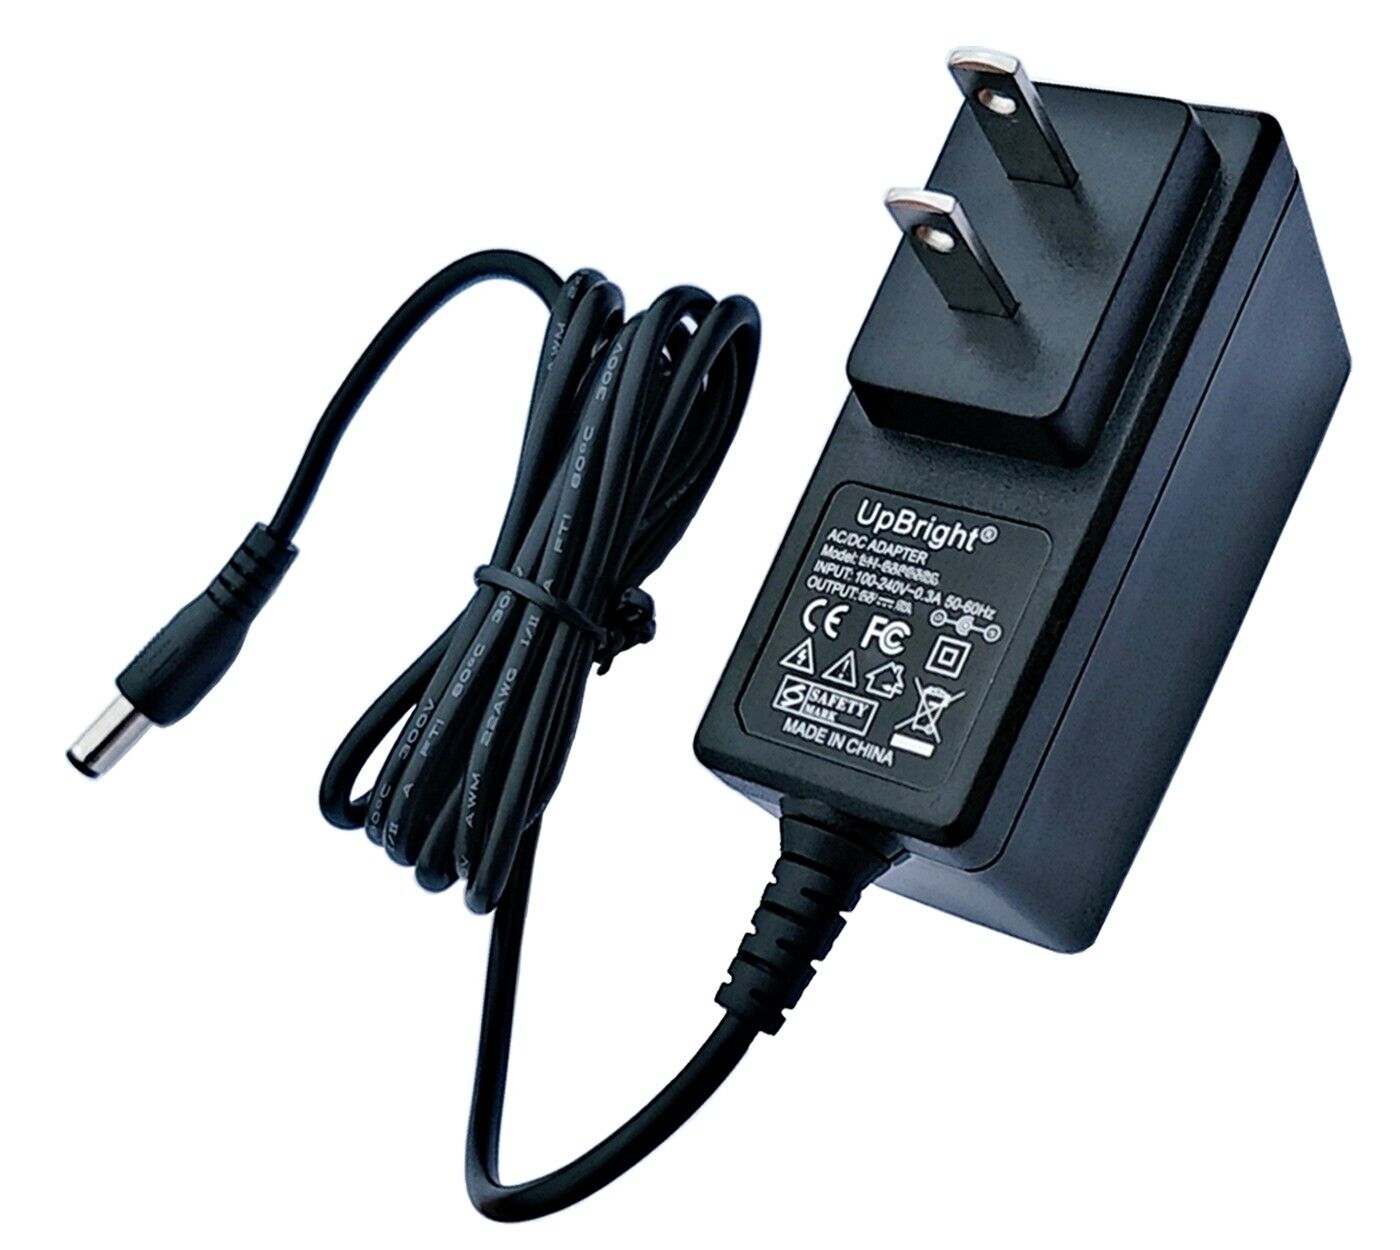 AC Adapter Charger For Starfavor SEK-88A 88Key Electronic Keyboard Digital Piano